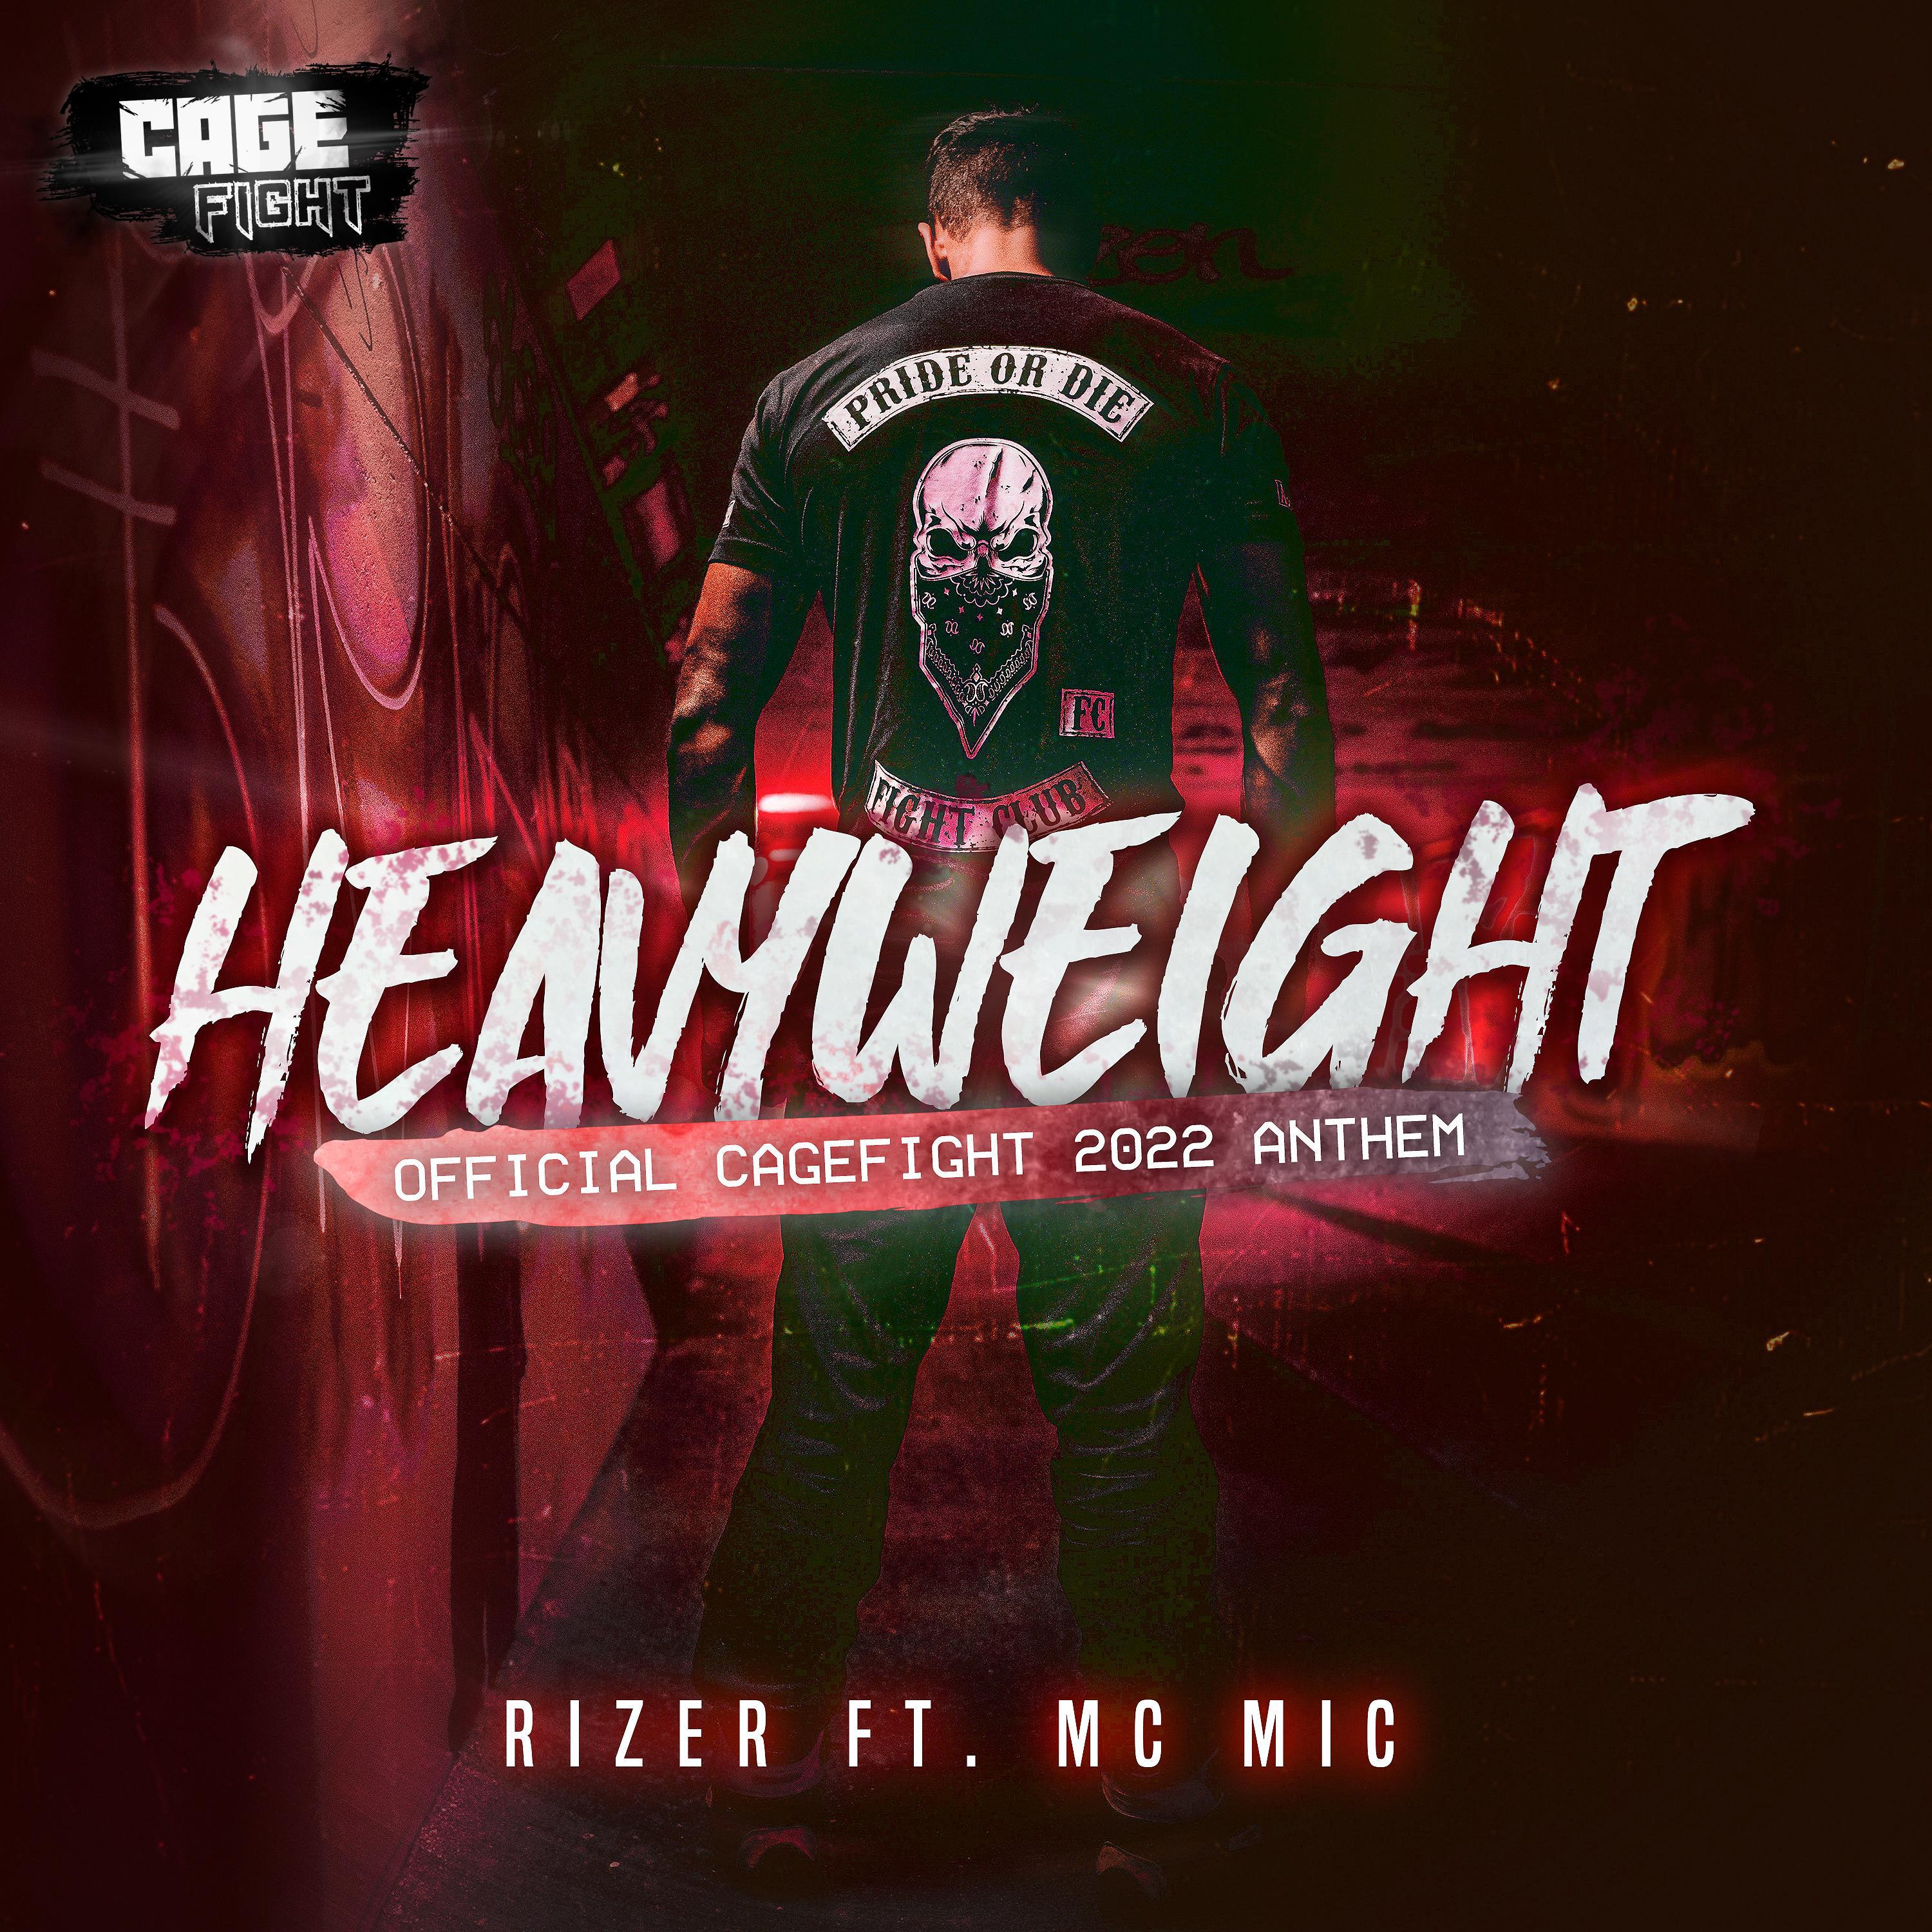 Rizer - Heavyweight (Official Cagefight Anthem 2022) (feat. MC Mic)